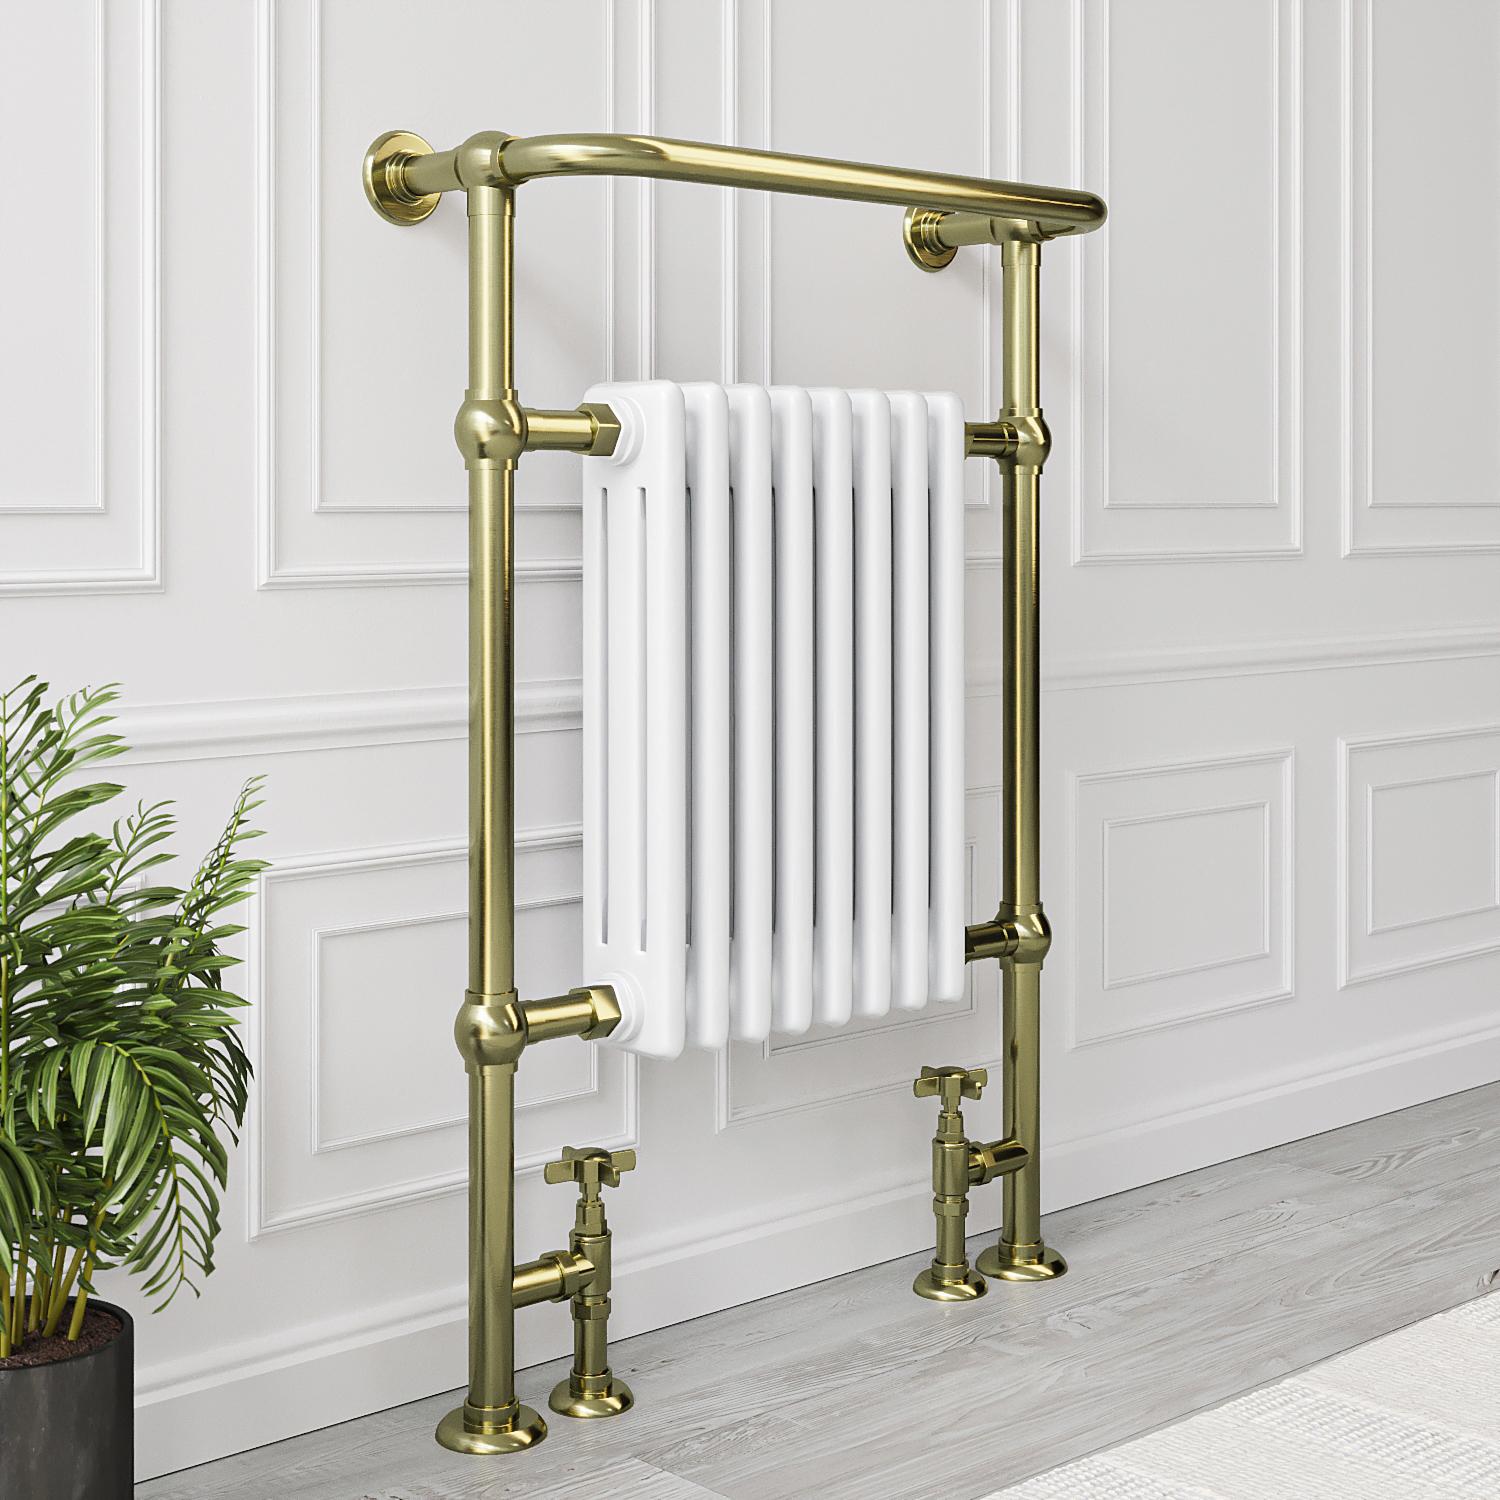 White and Brass Traditional Column Radiator with Towel Rail 952 x 659mm -  Regent - Furniture123